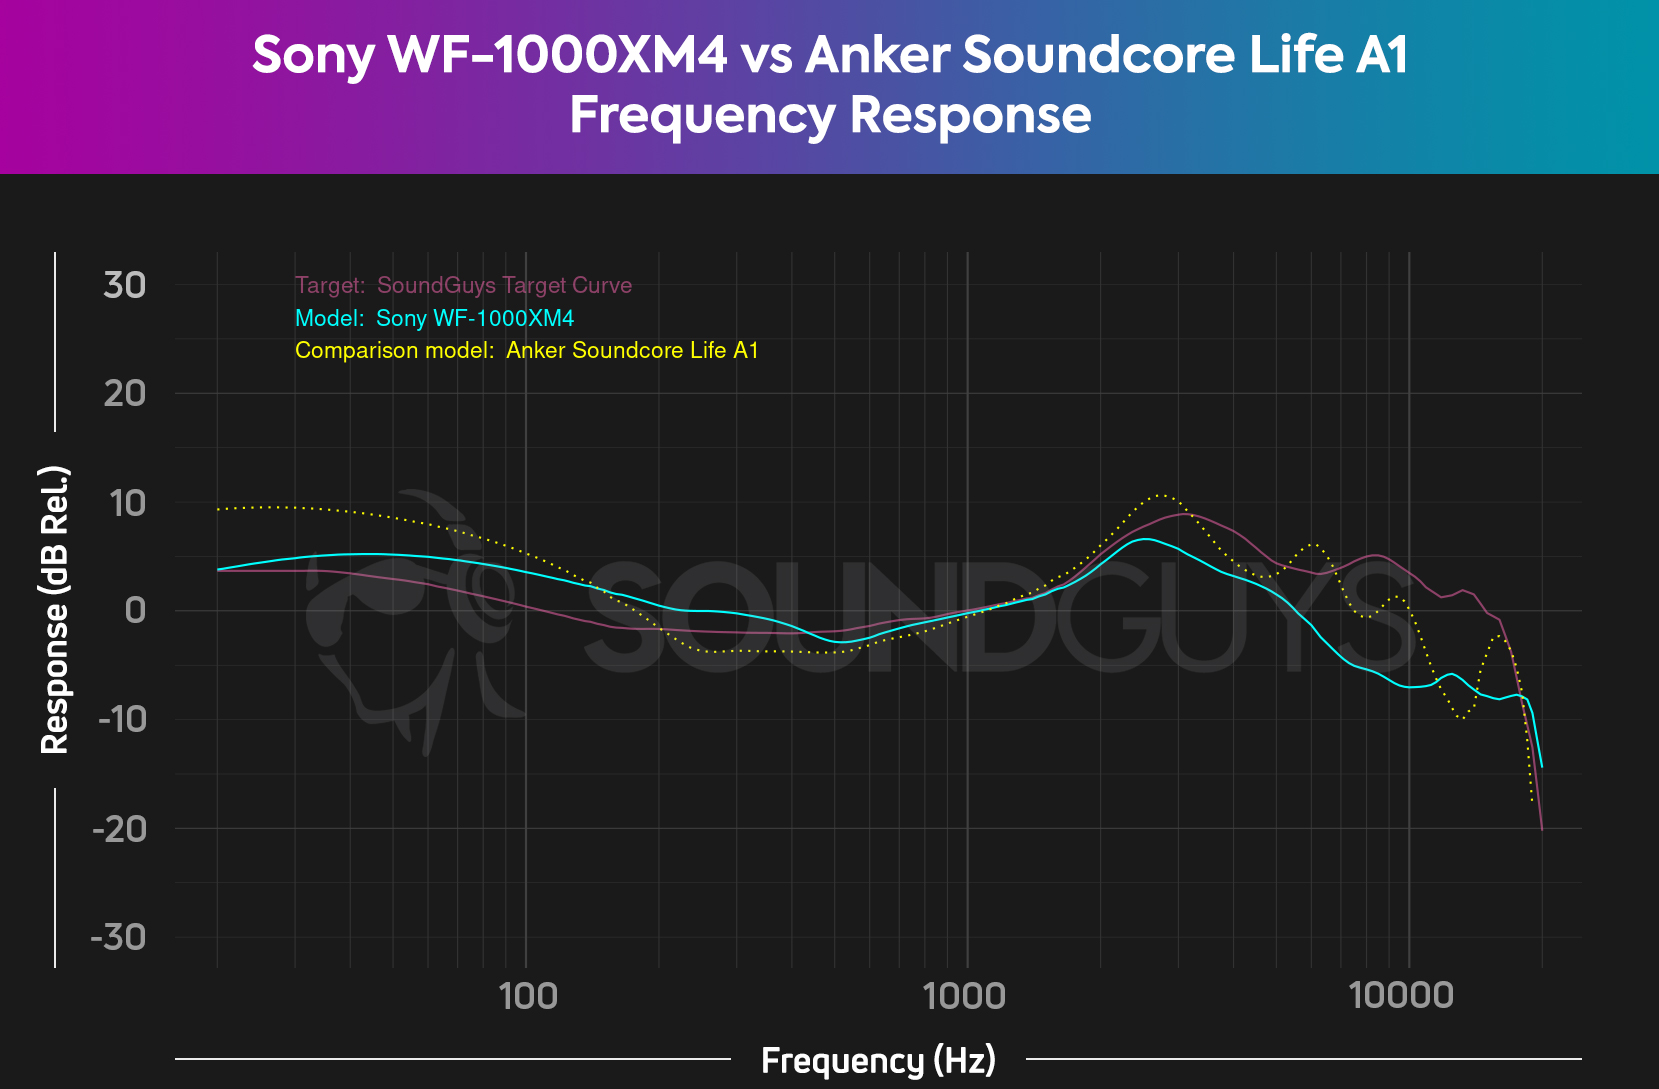 Sony WF 1000XM4 vs Anker Soundcore Life A1 frequency response comparison chart